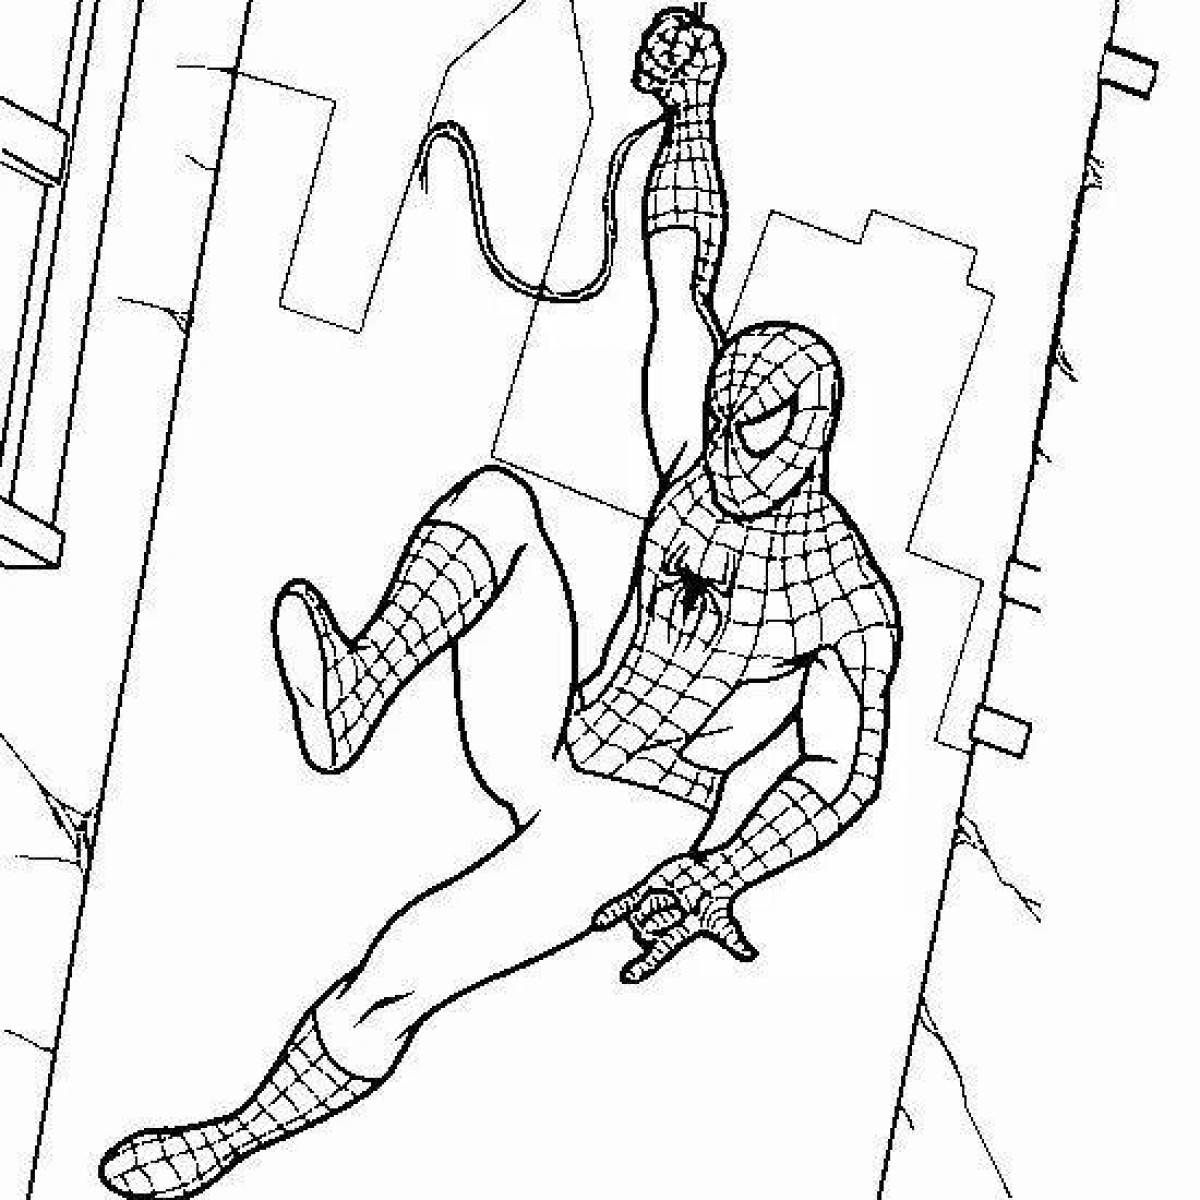 Exquisite spider-man with shield coloring book